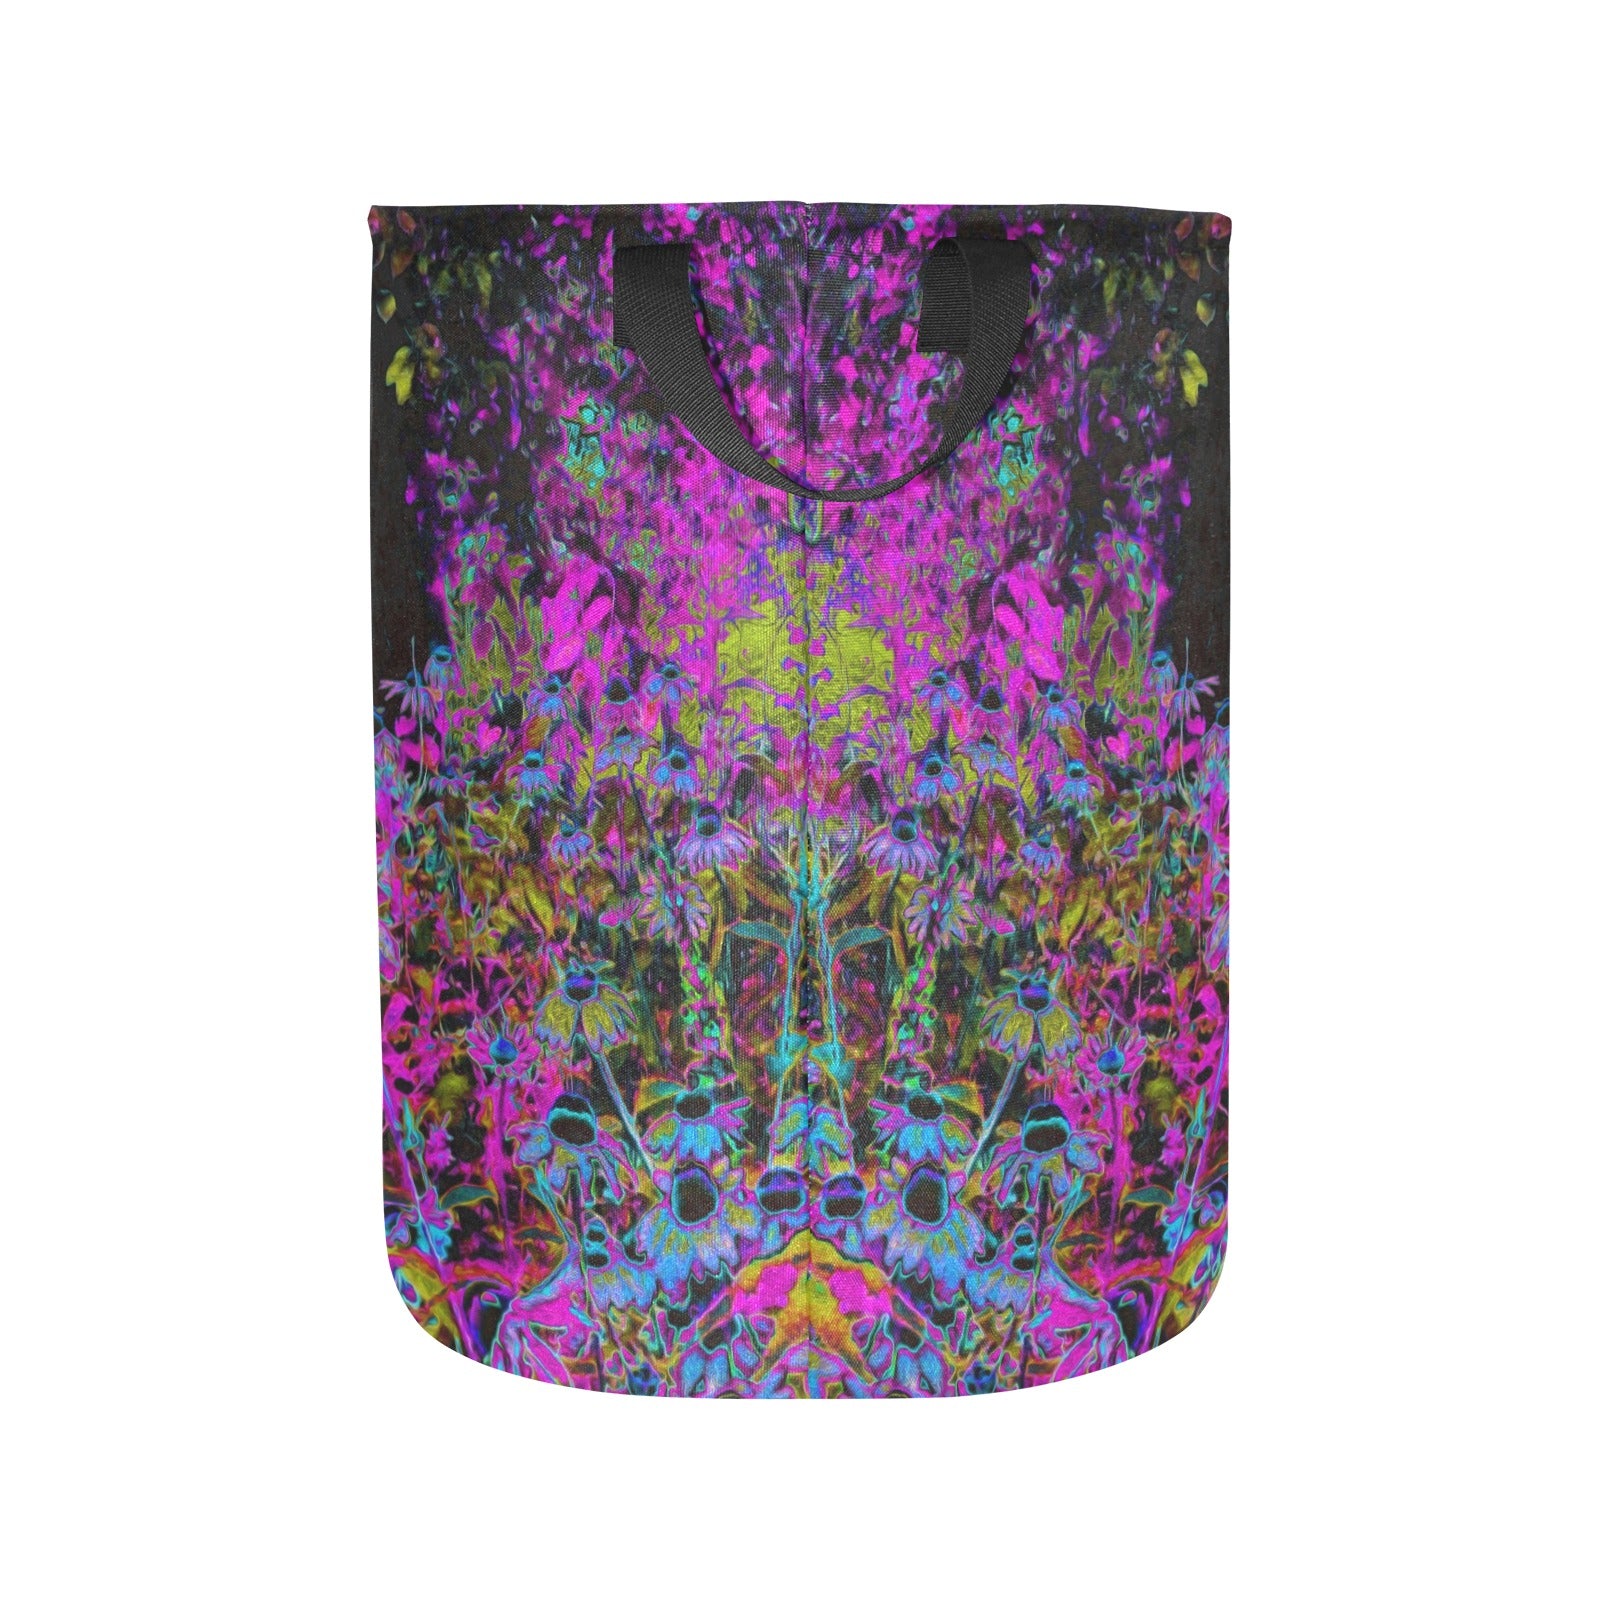 Fabric Laundry Basket with Handles, Psychedelic Hot Pink and Black Garden Sunrise